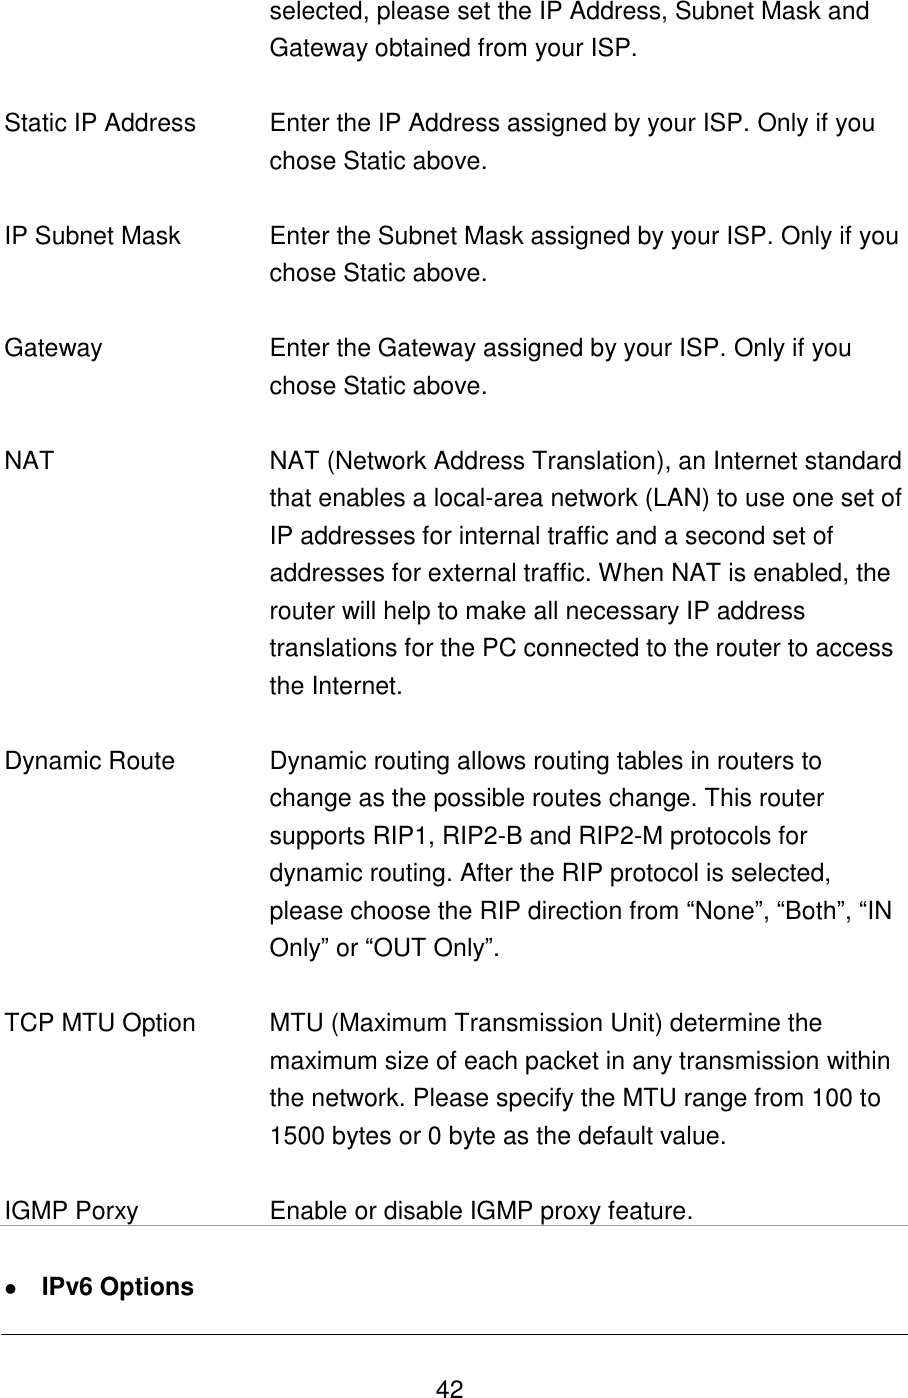   42 selected, please set the IP Address, Subnet Mask and Gateway obtained from your ISP.   Static IP Address Enter the IP Address assigned by your ISP. Only if you chose Static above.   IP Subnet Mask Enter the Subnet Mask assigned by your ISP. Only if you chose Static above.   Gateway Enter the Gateway assigned by your ISP. Only if you chose Static above.   NAT NAT (Network Address Translation), an Internet standard that enables a local-area network (LAN) to use one set of IP addresses for internal traffic and a second set of addresses for external traffic. When NAT is enabled, the router will help to make all necessary IP address translations for the PC connected to the router to access the Internet.   Dynamic Route Dynamic routing allows routing tables in routers to change as the possible routes change. This router supports RIP1, RIP2-B and RIP2-M protocols for dynamic routing. After the RIP protocol is selected, please choose the RIP direction from “None”, “Both”, “IN Only” or “OUT Only”.   TCP MTU Option MTU (Maximum Transmission Unit) determine the maximum size of each packet in any transmission within the network. Please specify the MTU range from 100 to 1500 bytes or 0 byte as the default value.    IGMP Porxy Enable or disable IGMP proxy feature.   IPv6 Options 